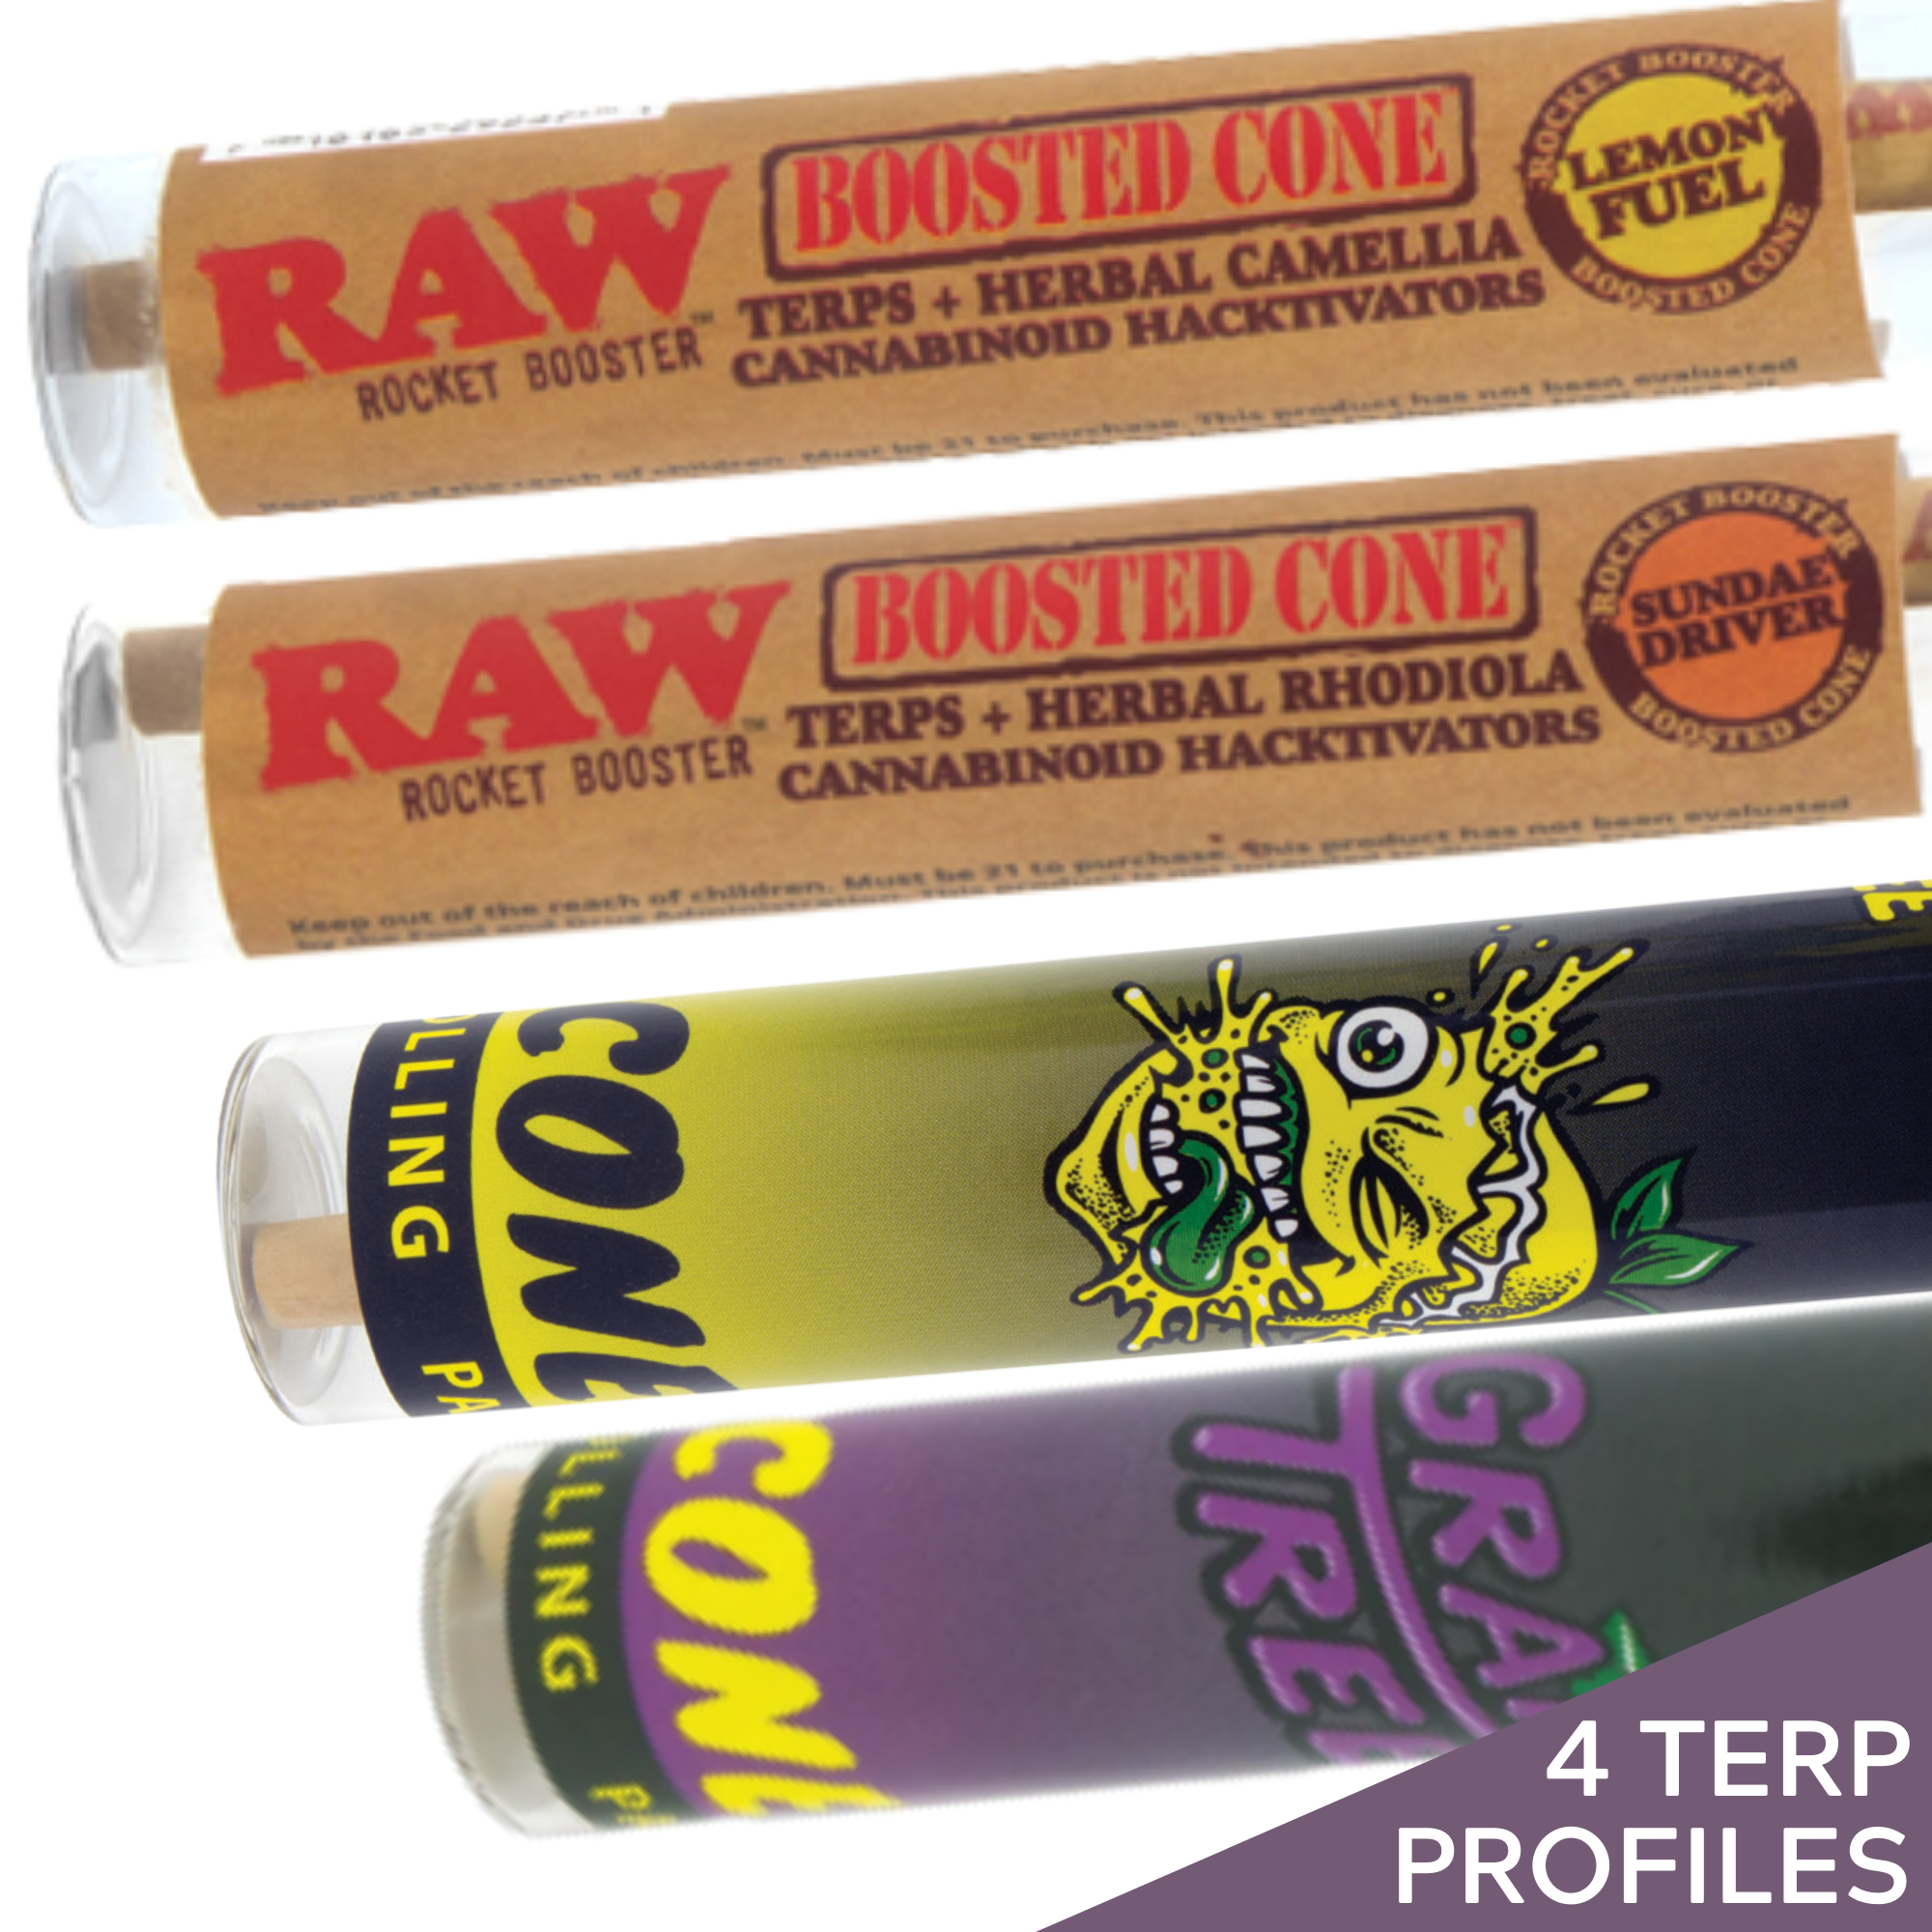 raw terpene infused papers| matriarch.la